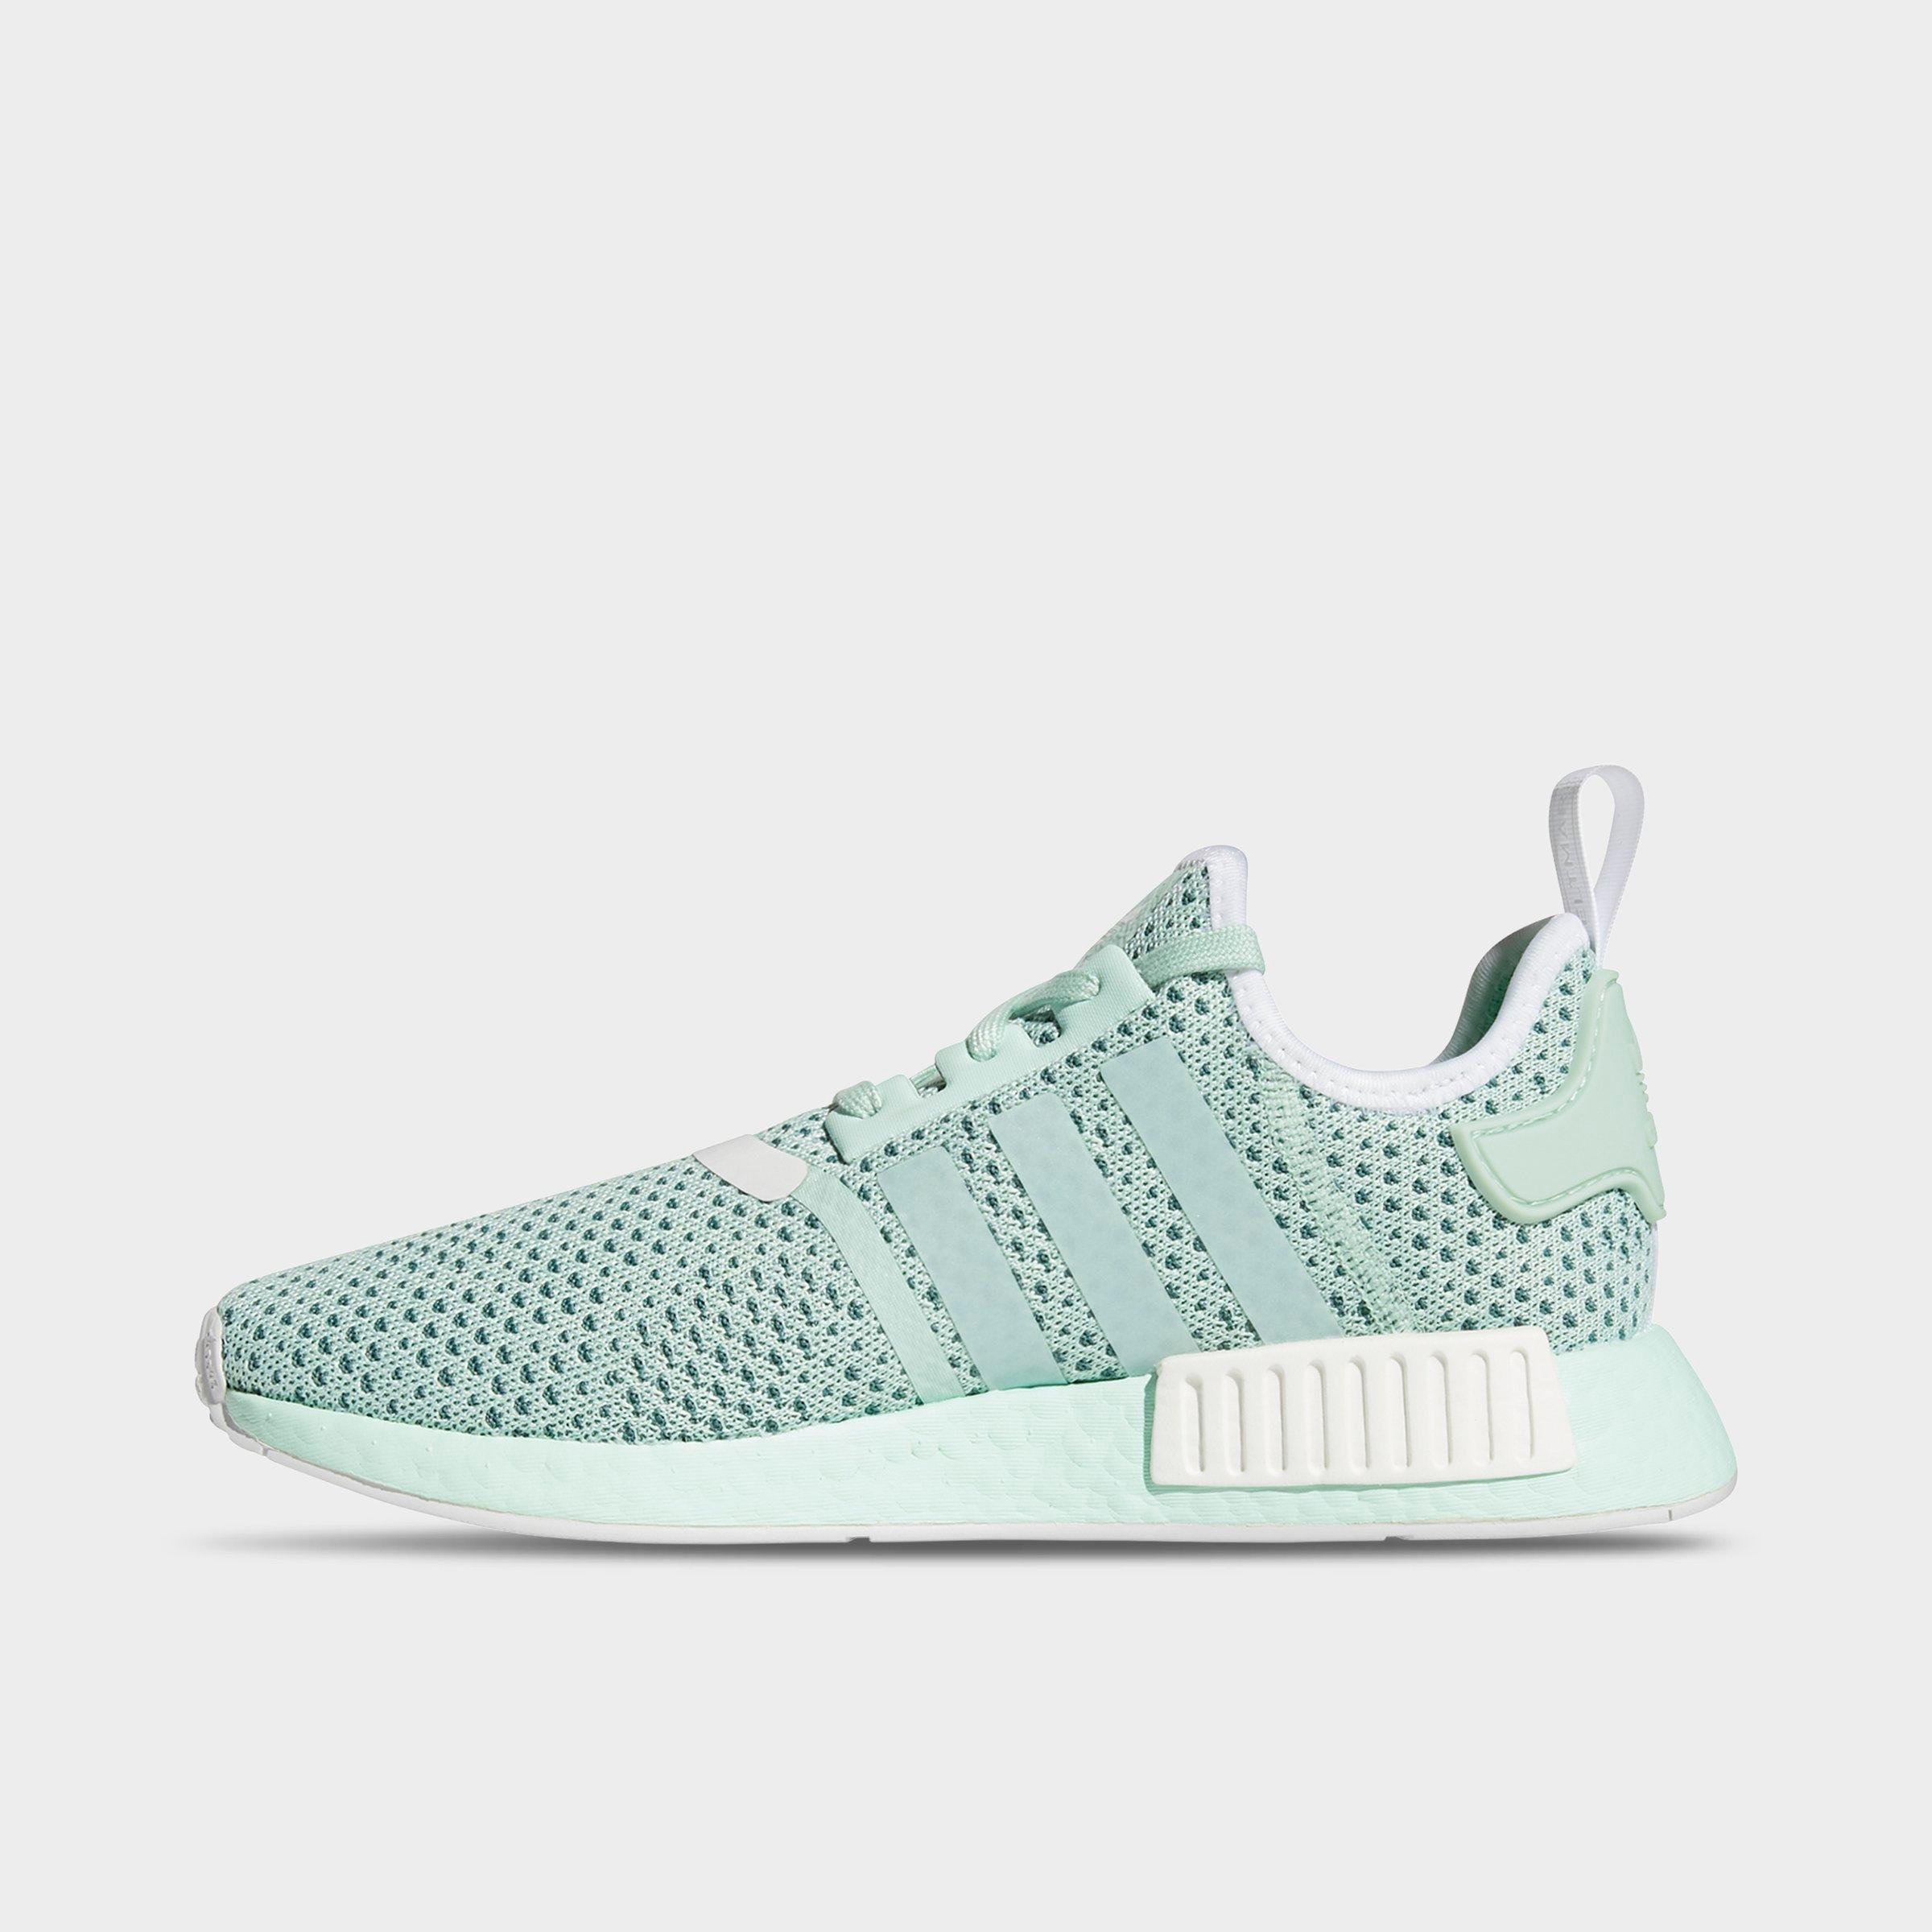 nmd size 2.5